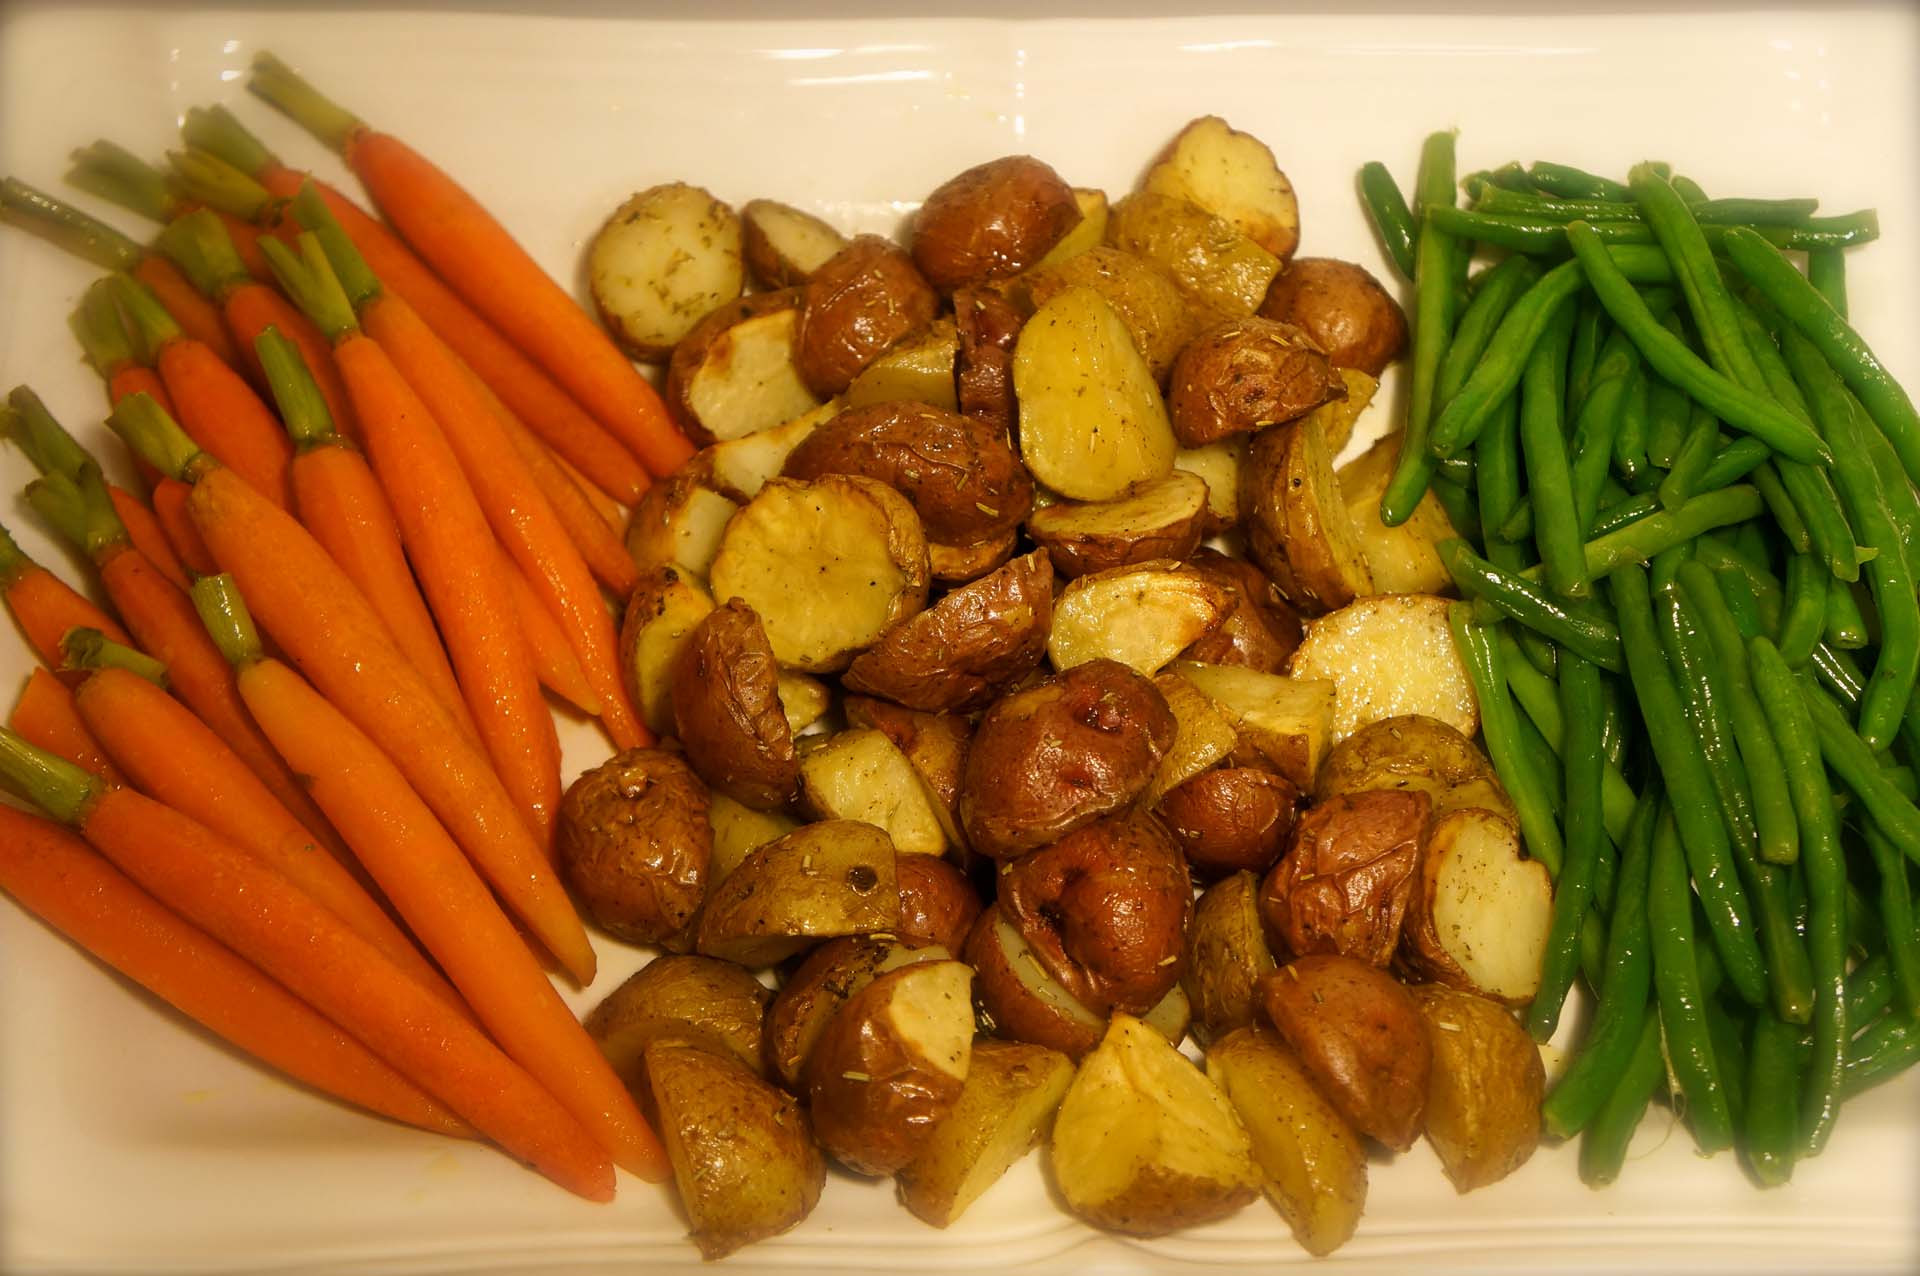 Roasted Potatoes And Vegetables
 Steamed Ve ables and Roasted Potatoes